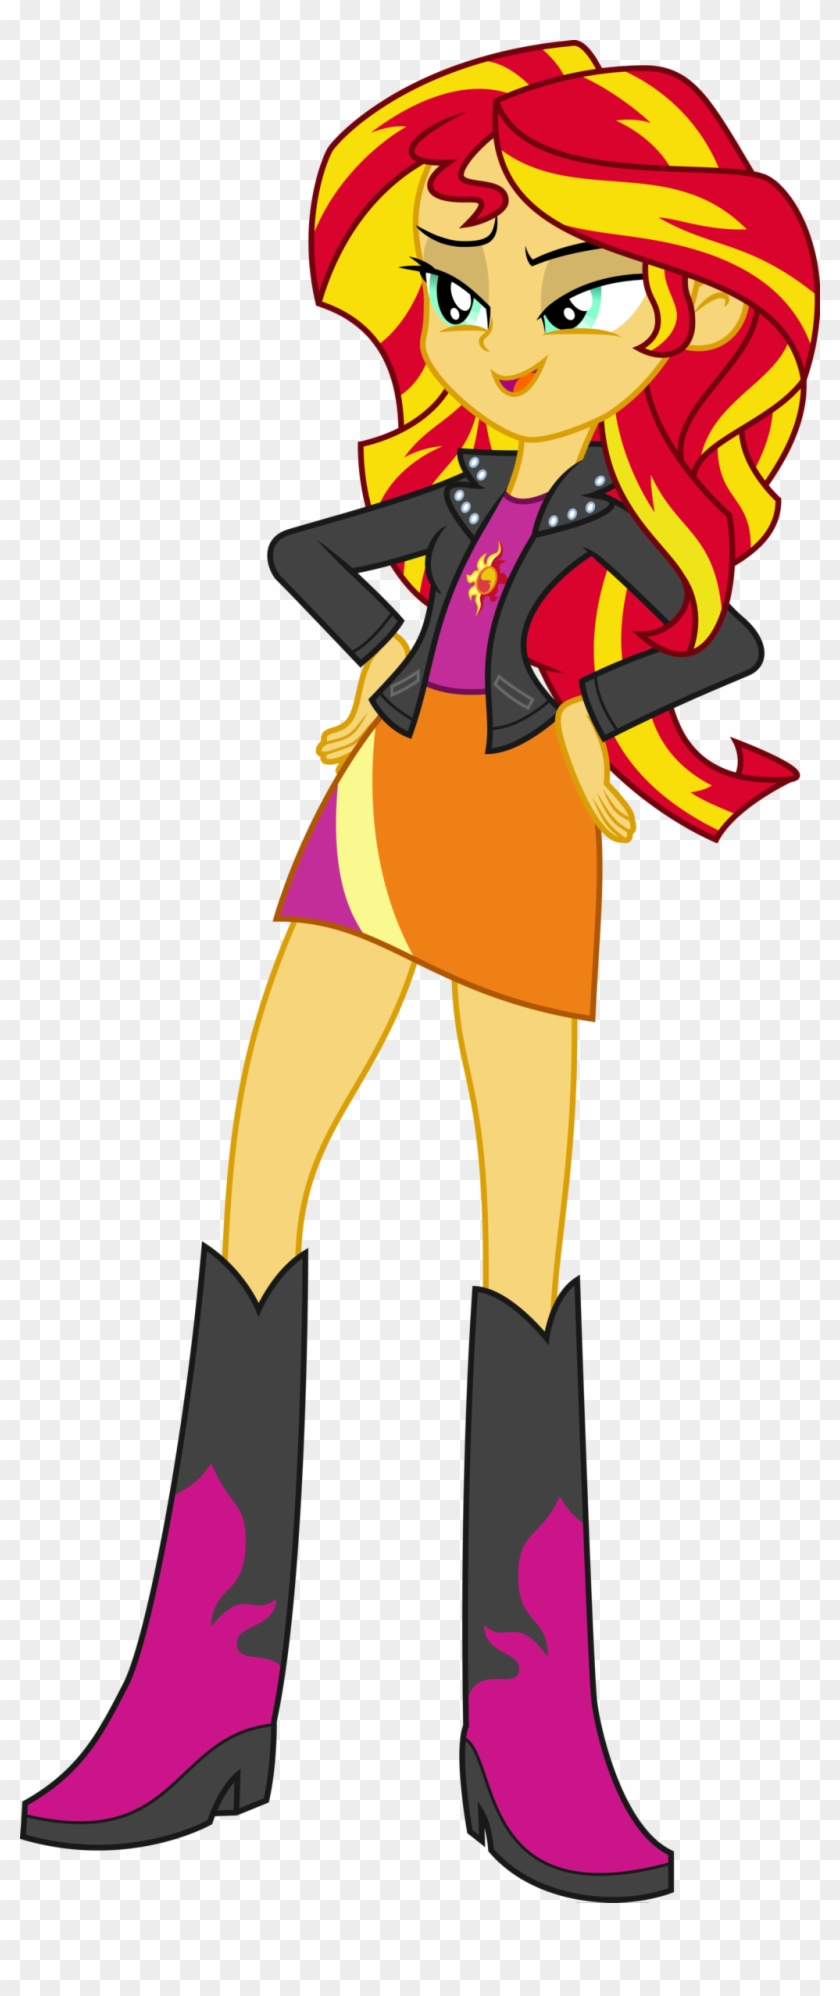 Sunset Shimmer By Mewtwo-ex - Sunset Shimmer Equestria Girl Costume #367606